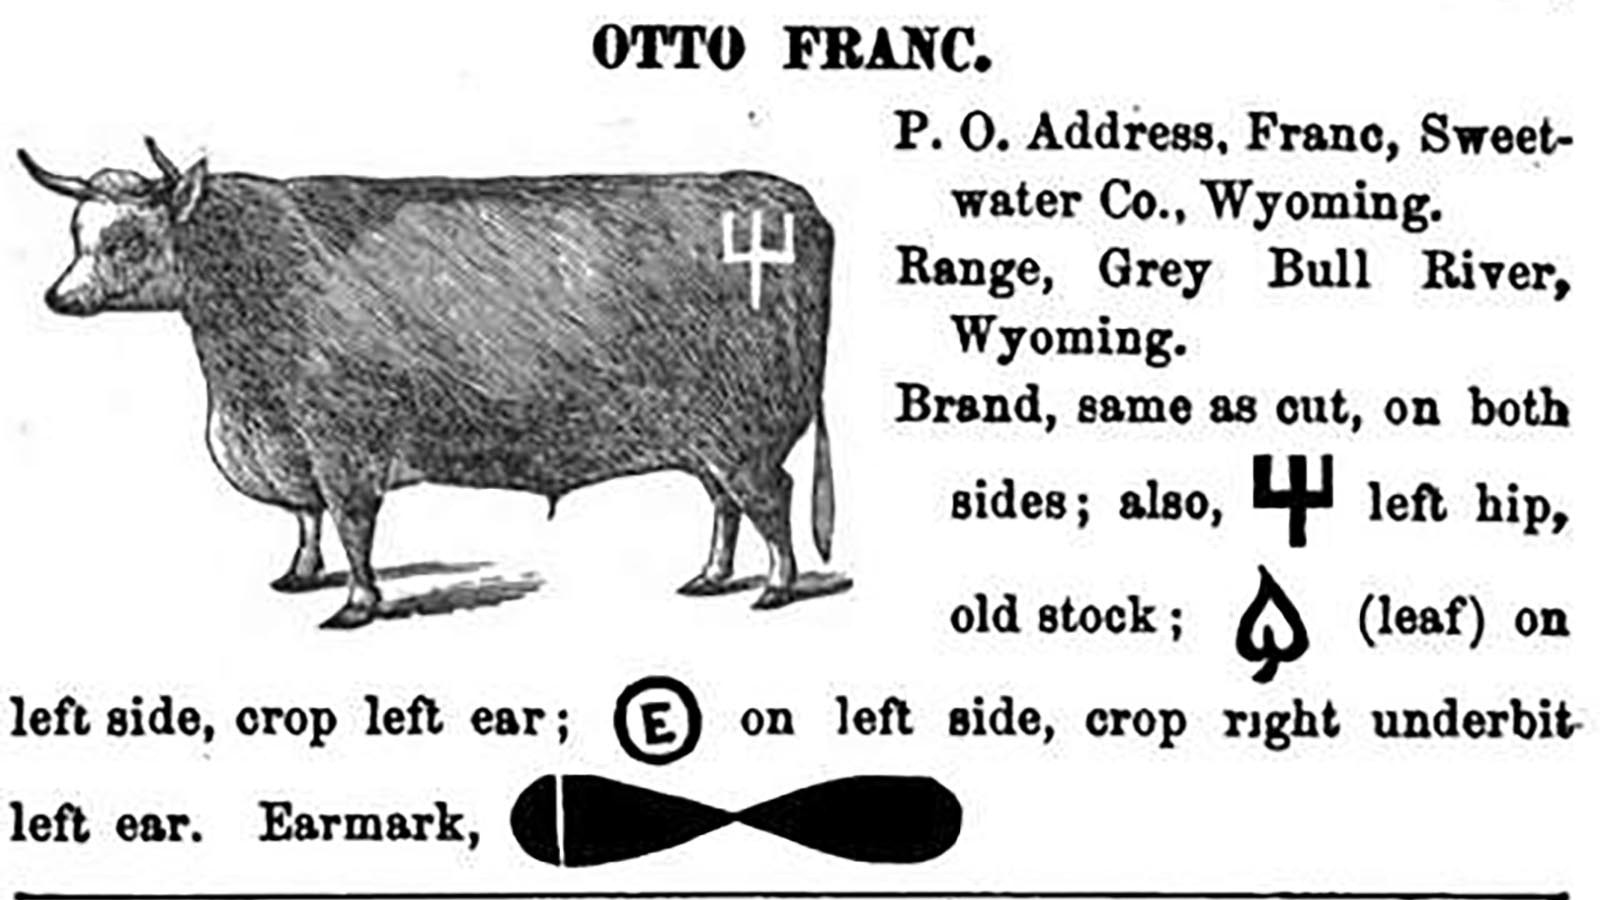 A card showing the original Pitchfork brand for the Pitchfork Ranch in Wyoming.